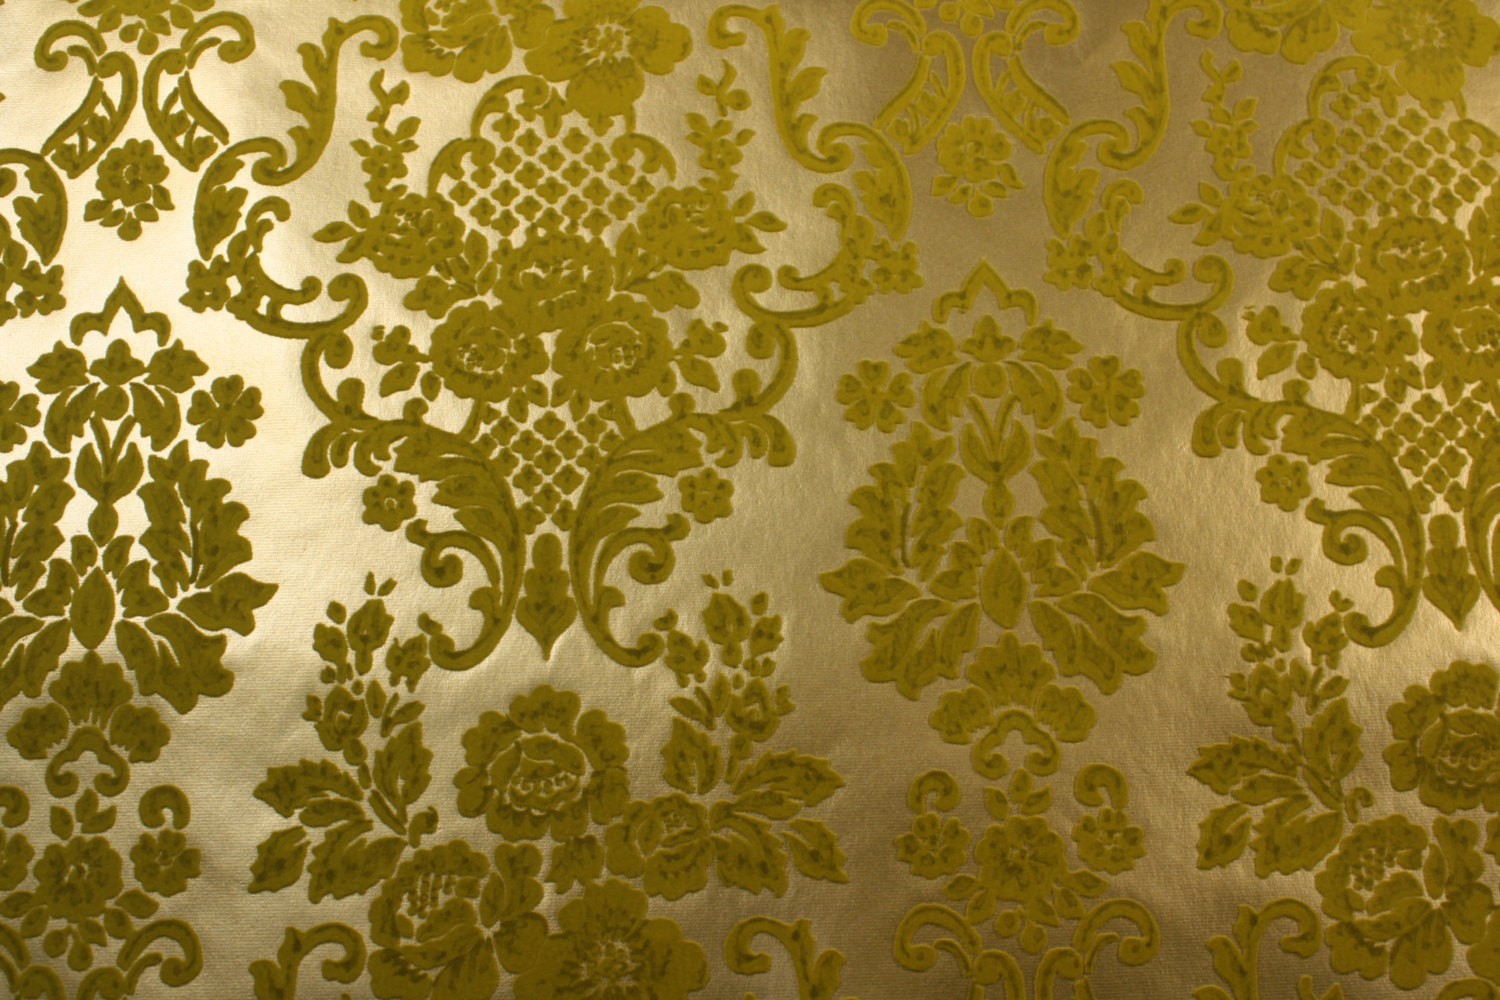 Damask Flocked Wallpaper Gold On Green - Green And Gold Damask - HD Wallpaper 